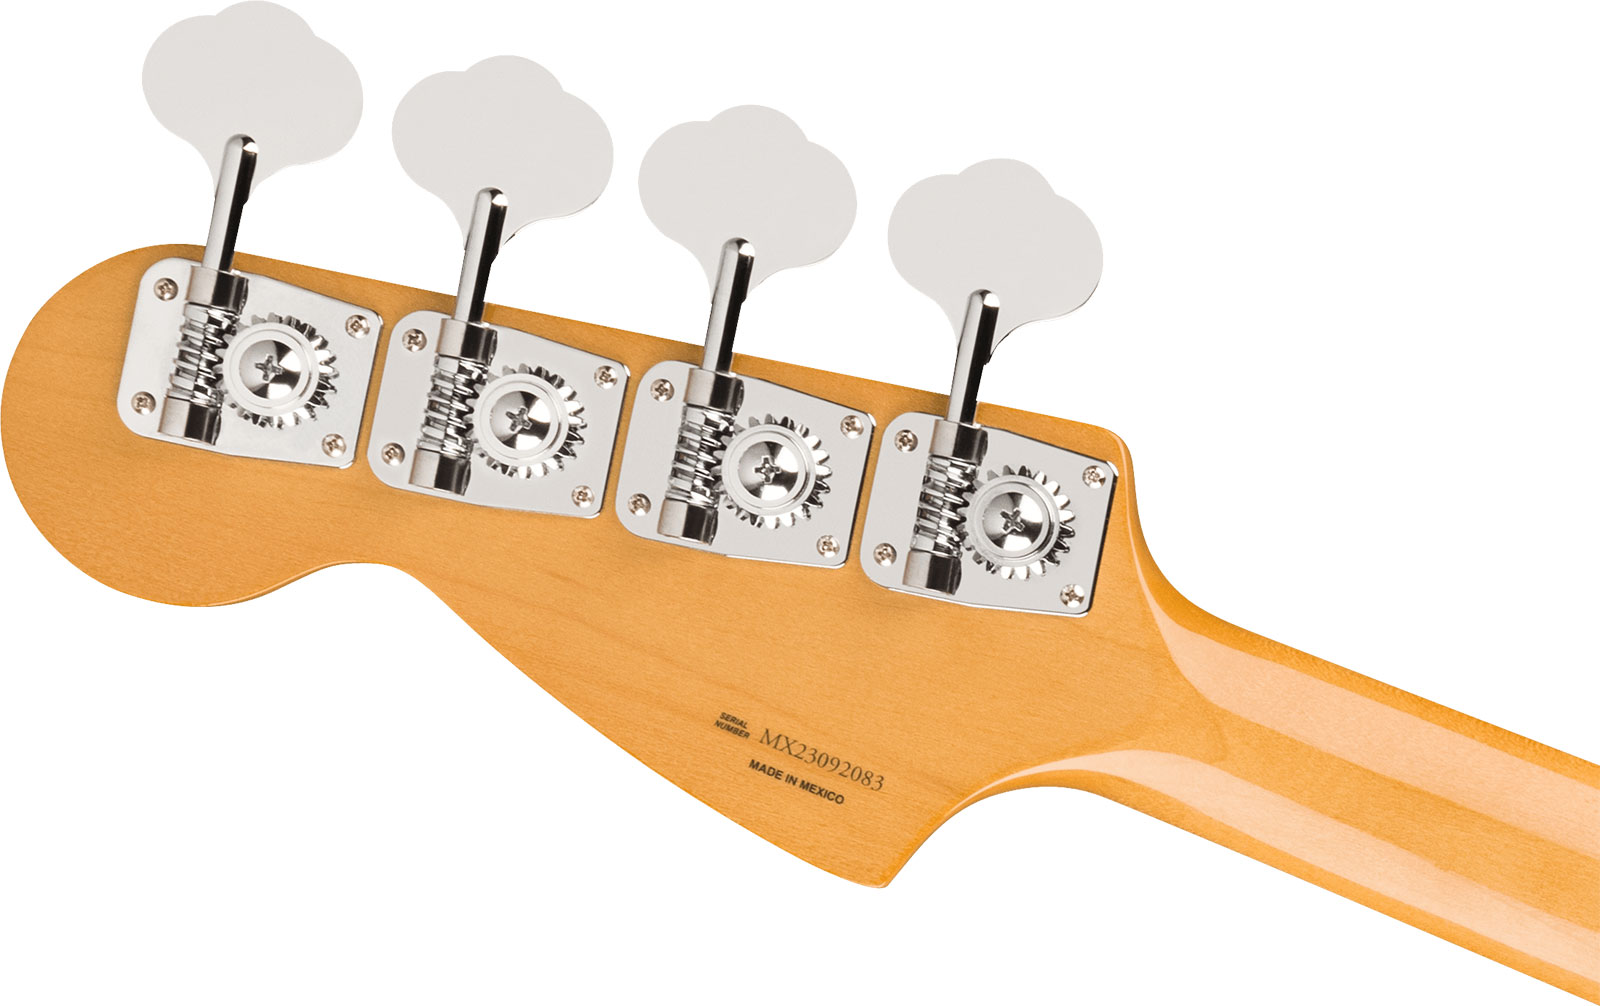 Fender Mustang Bass 70s Competition Vintera 2 Rw - Competition Orange - Solid body electric bass - Variation 3